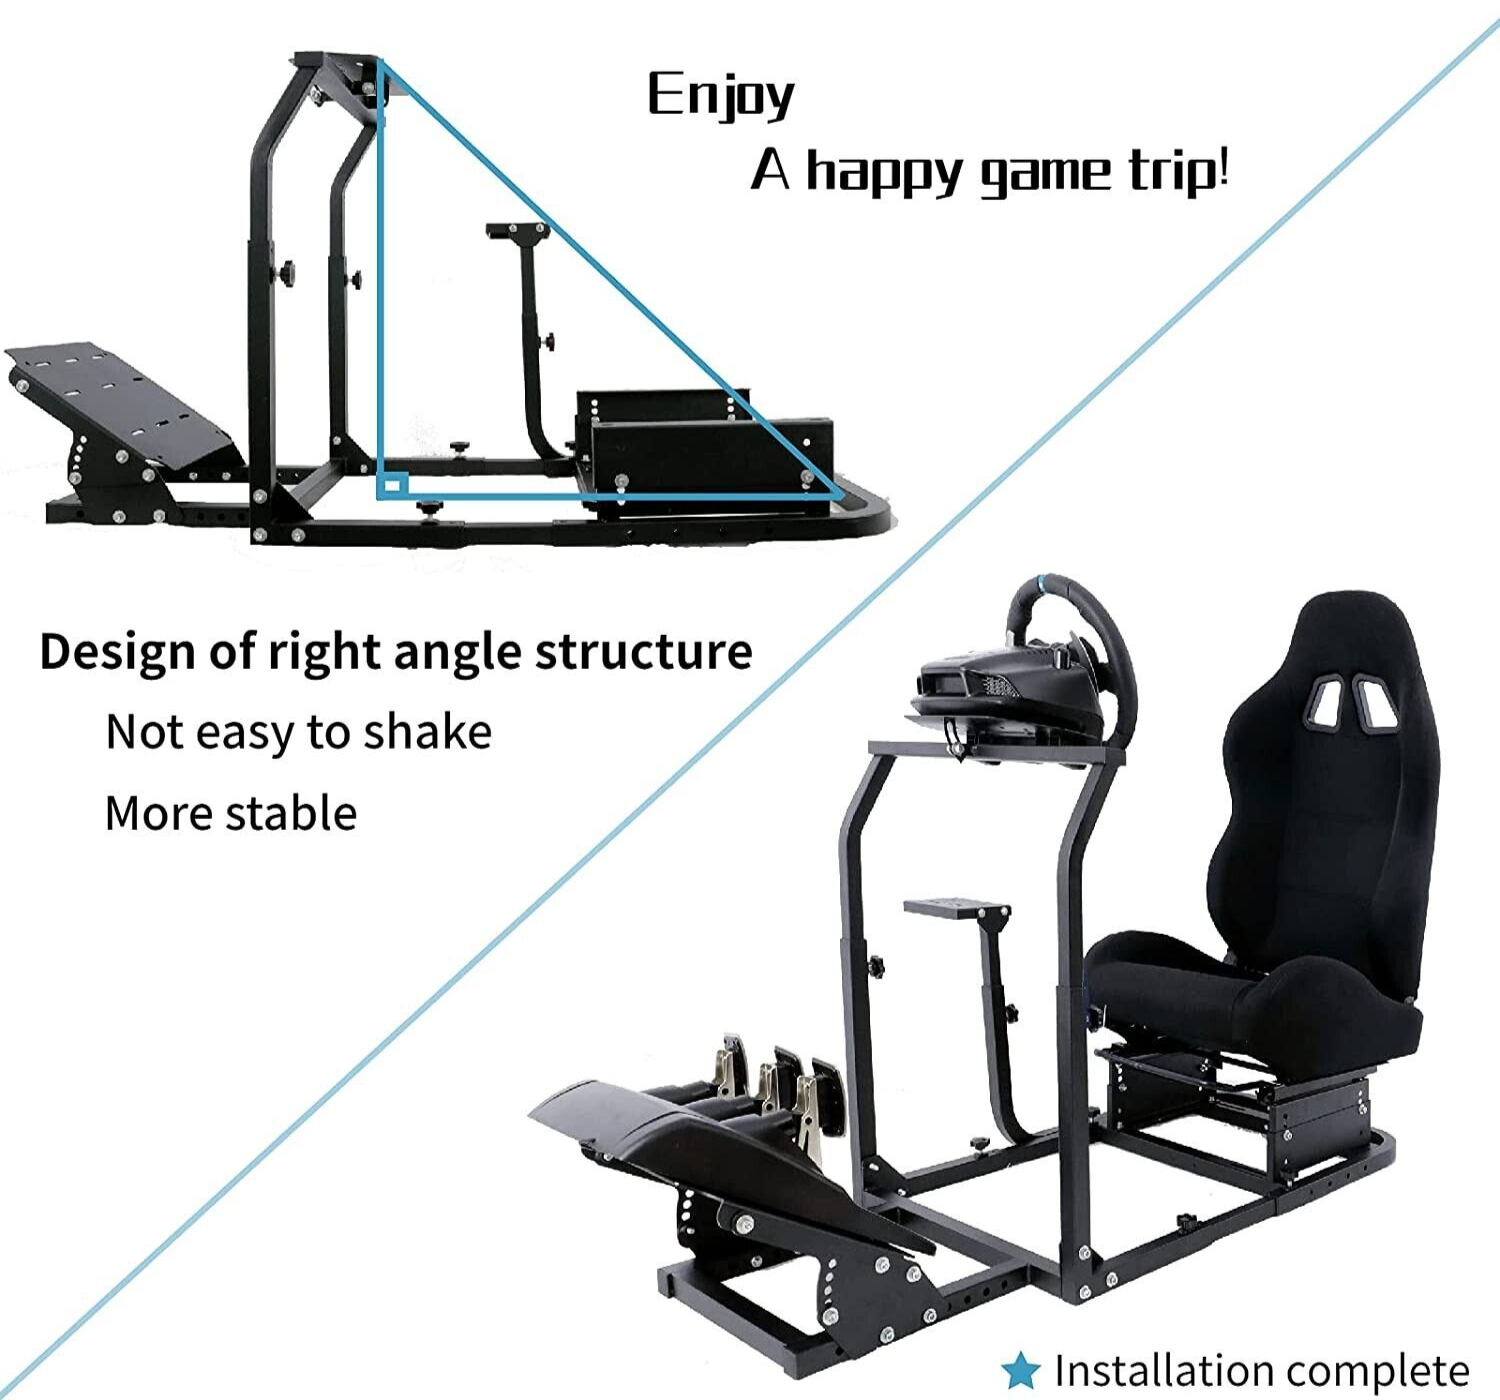 AZ Driving Game Sim Racing Frame Rig for Seat Wheel Pedals Xbox PS PC Console F1